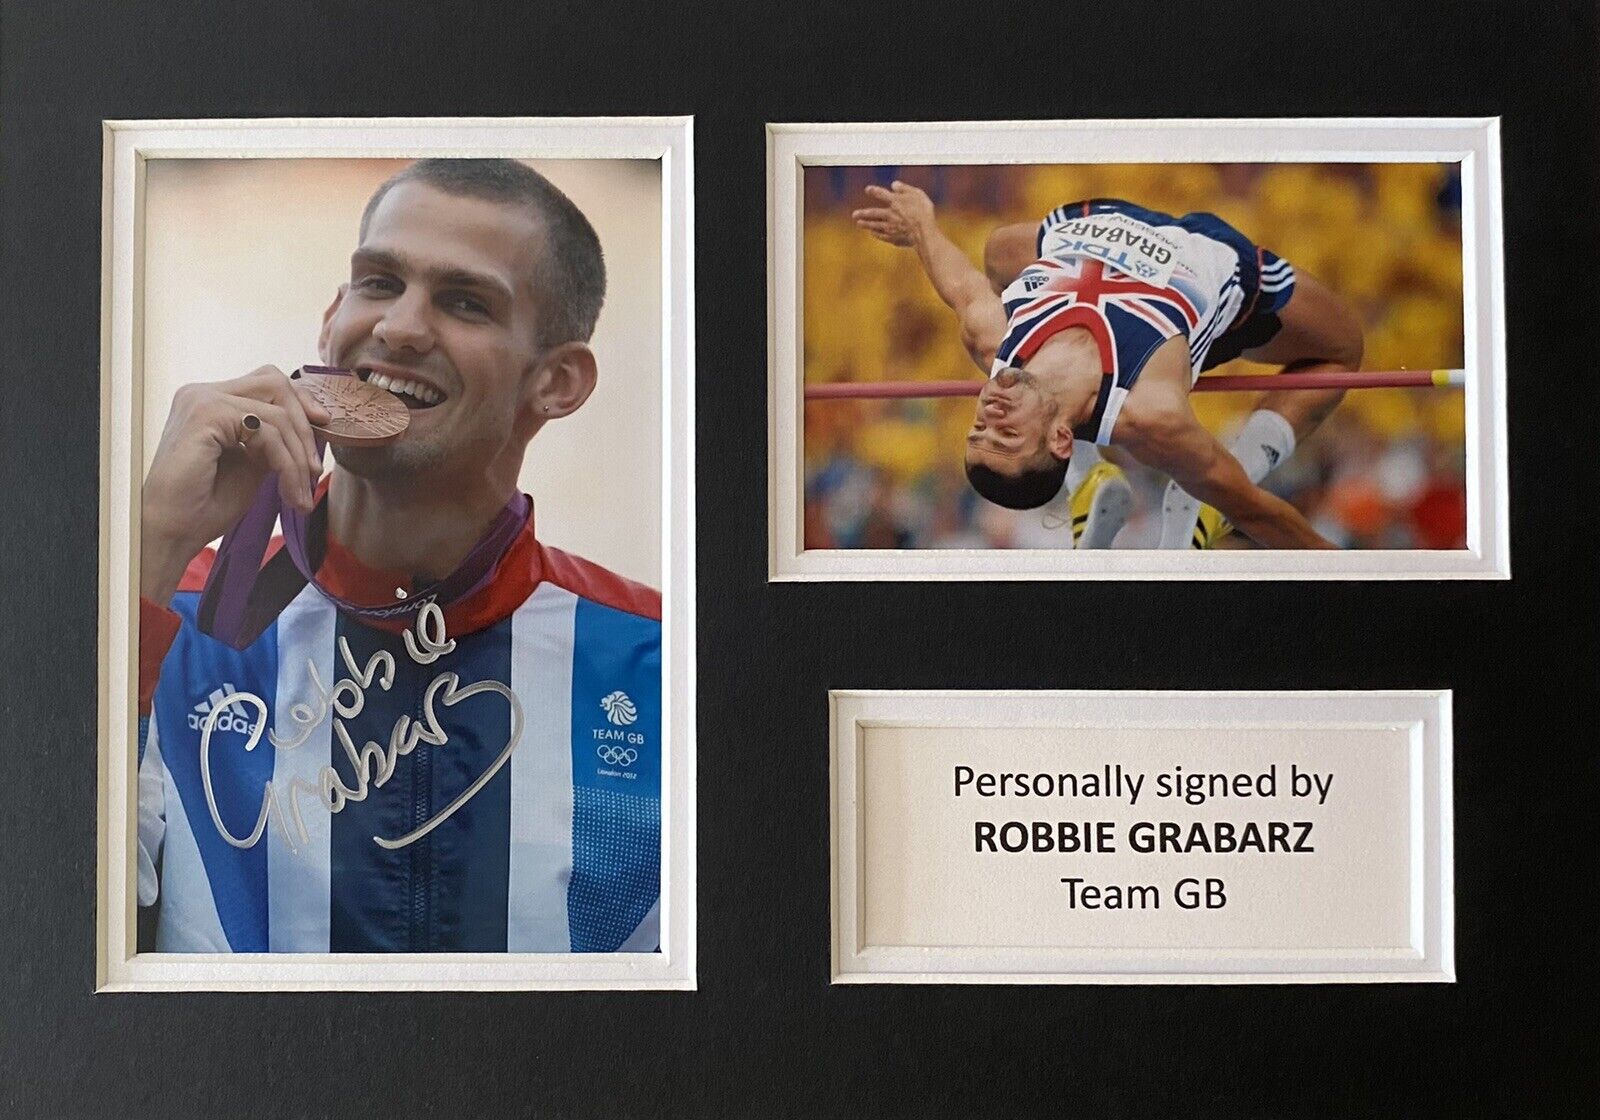 Robbie Grabarz Hand Signed Photo Poster painting In A4 Mount Display - Olympics - Team GB